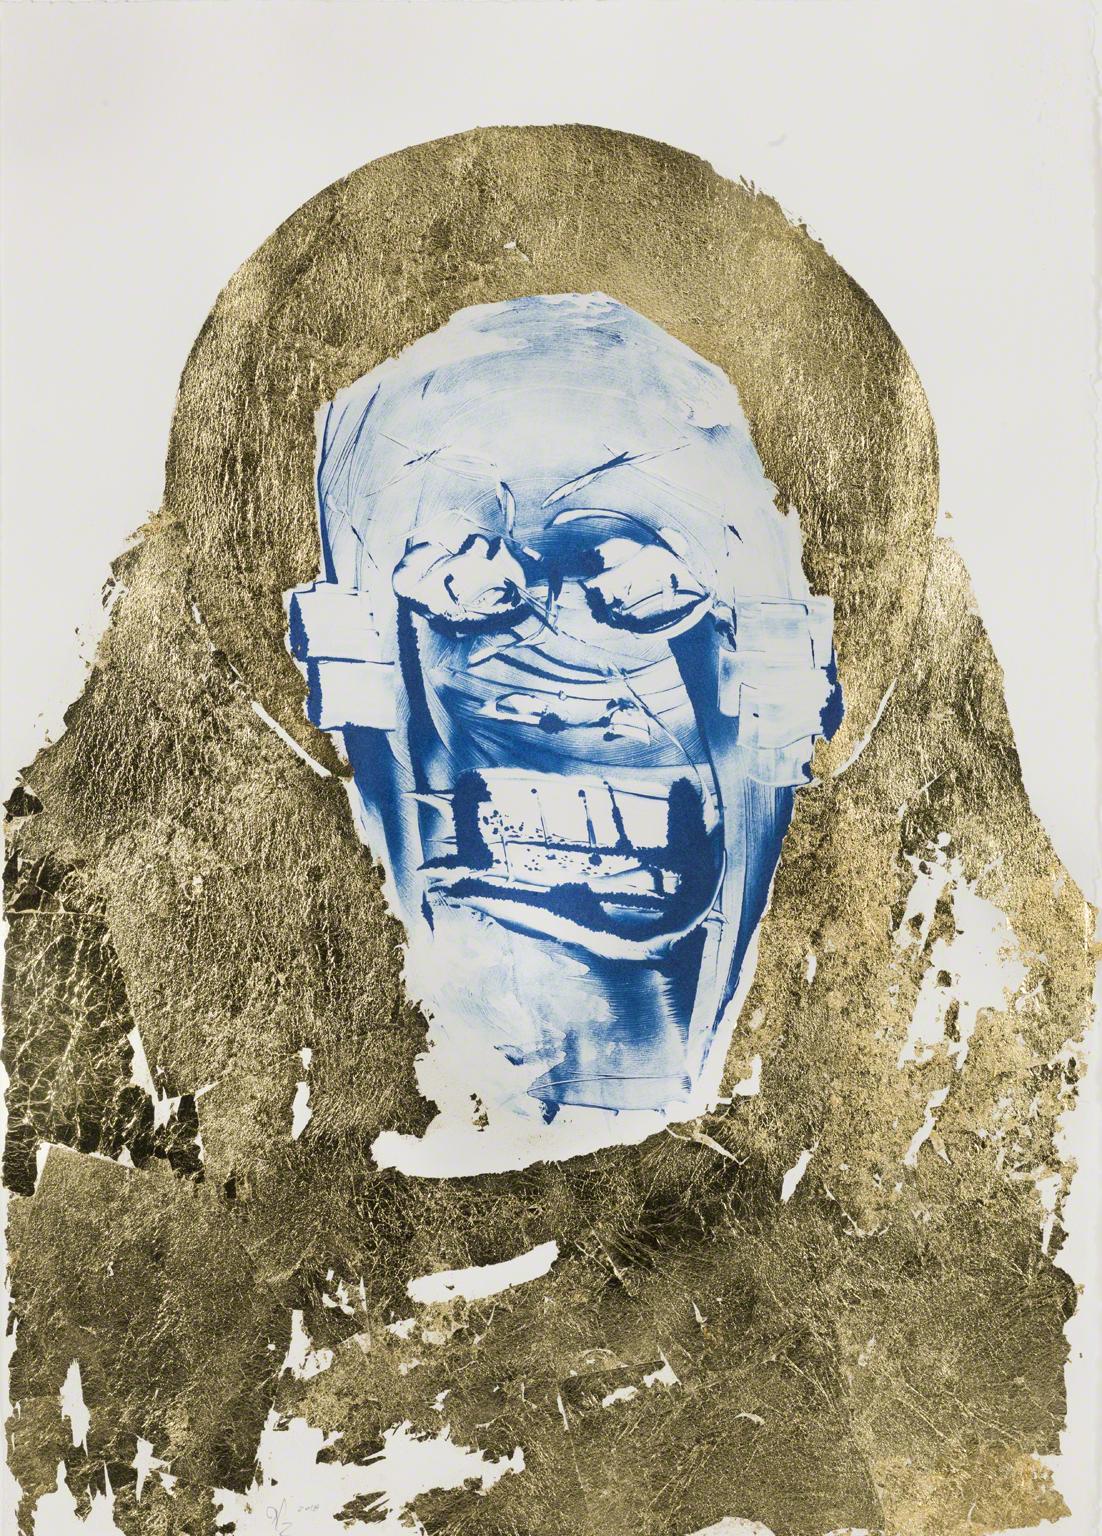 Portrait of an abstracted face in blue with gold leave halo on paper